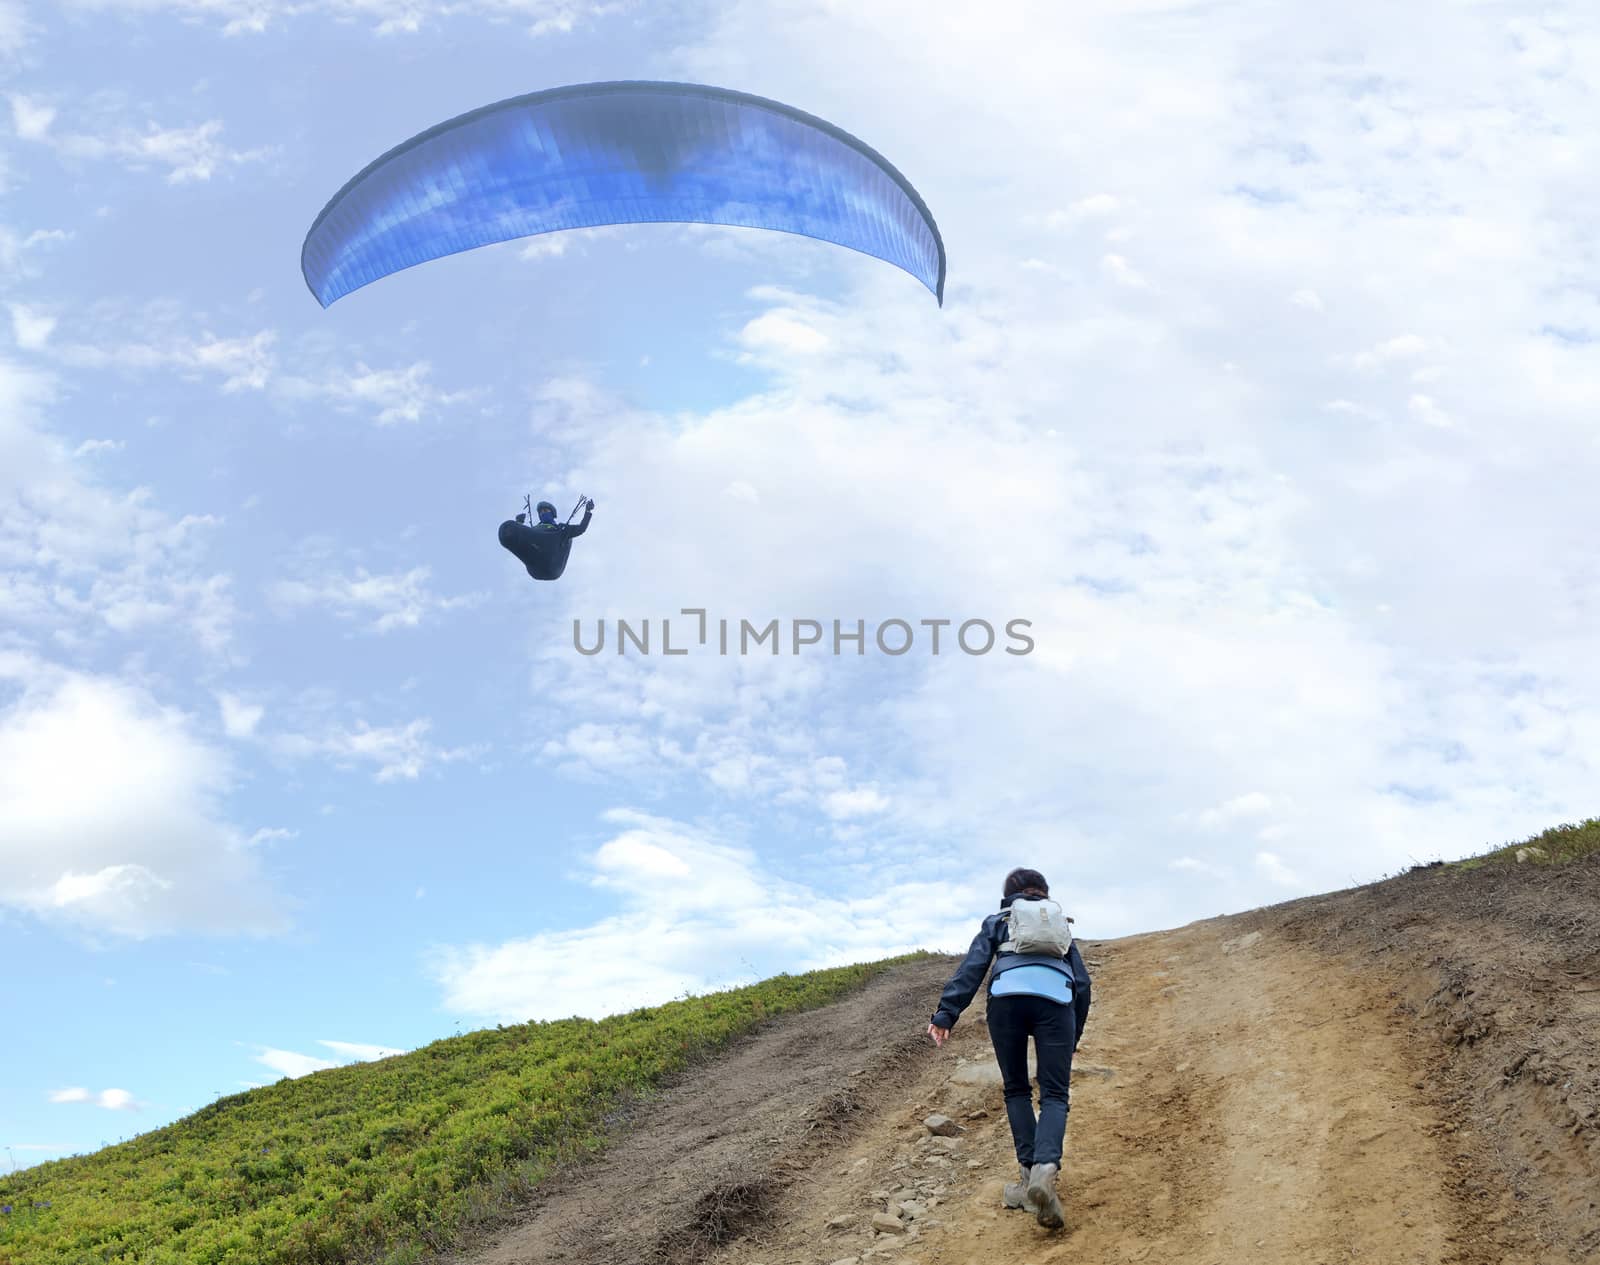 A young woman with a backpack behind her shoulders climbs up a mountain and looks at the floating paraglider hovering in the air against the blue sky and white clouds